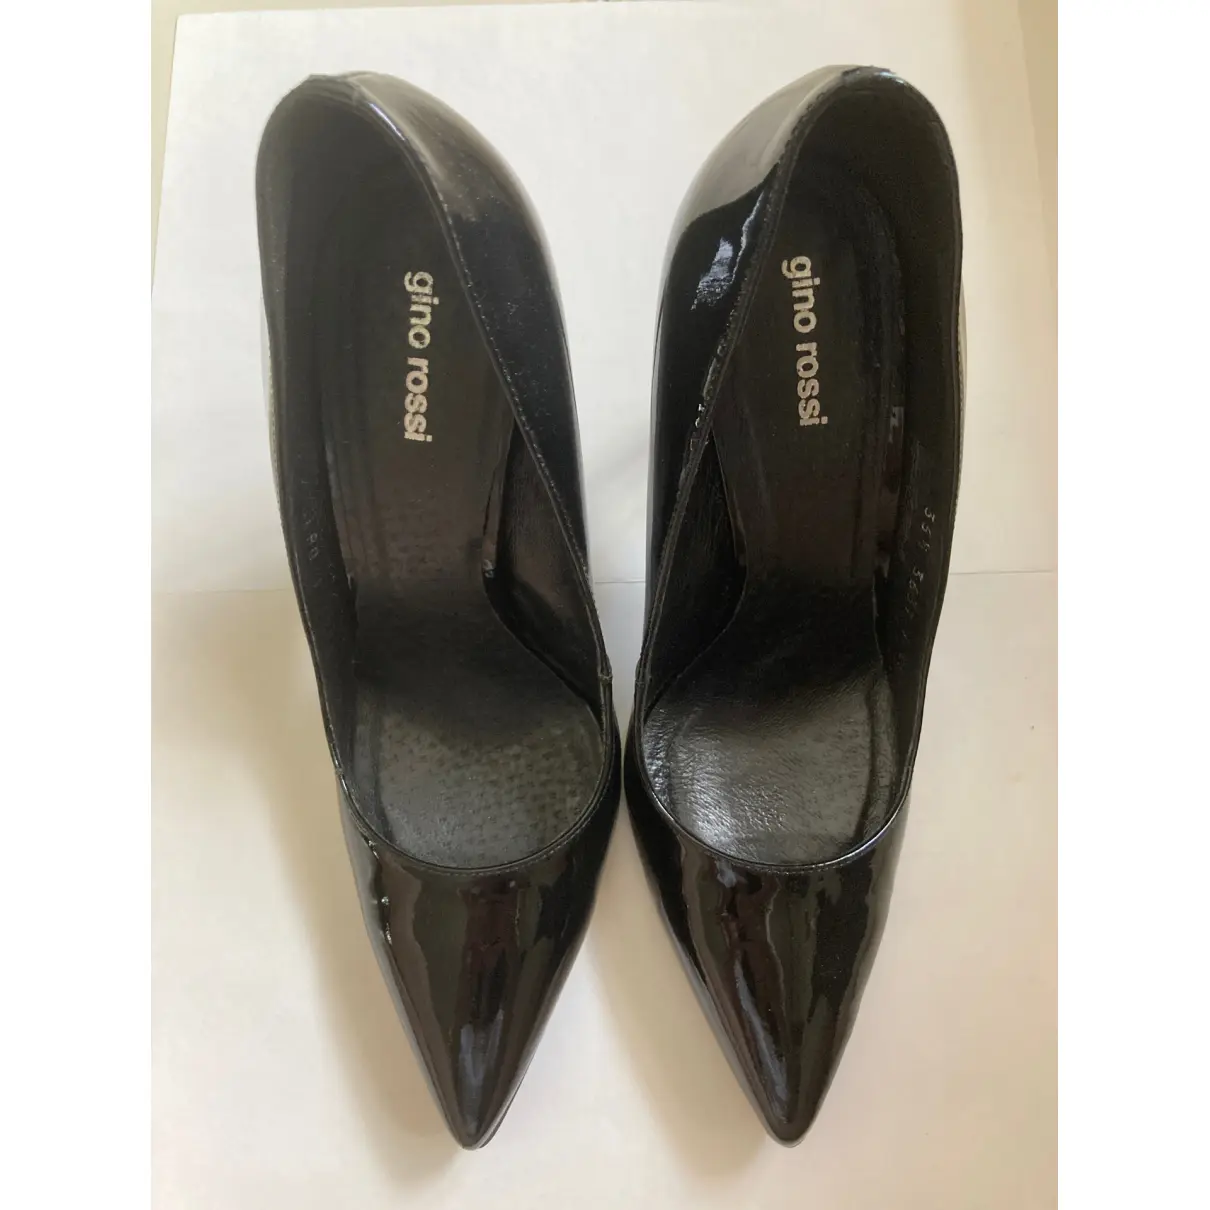 Buy Gino Rossi Patent leather heels online